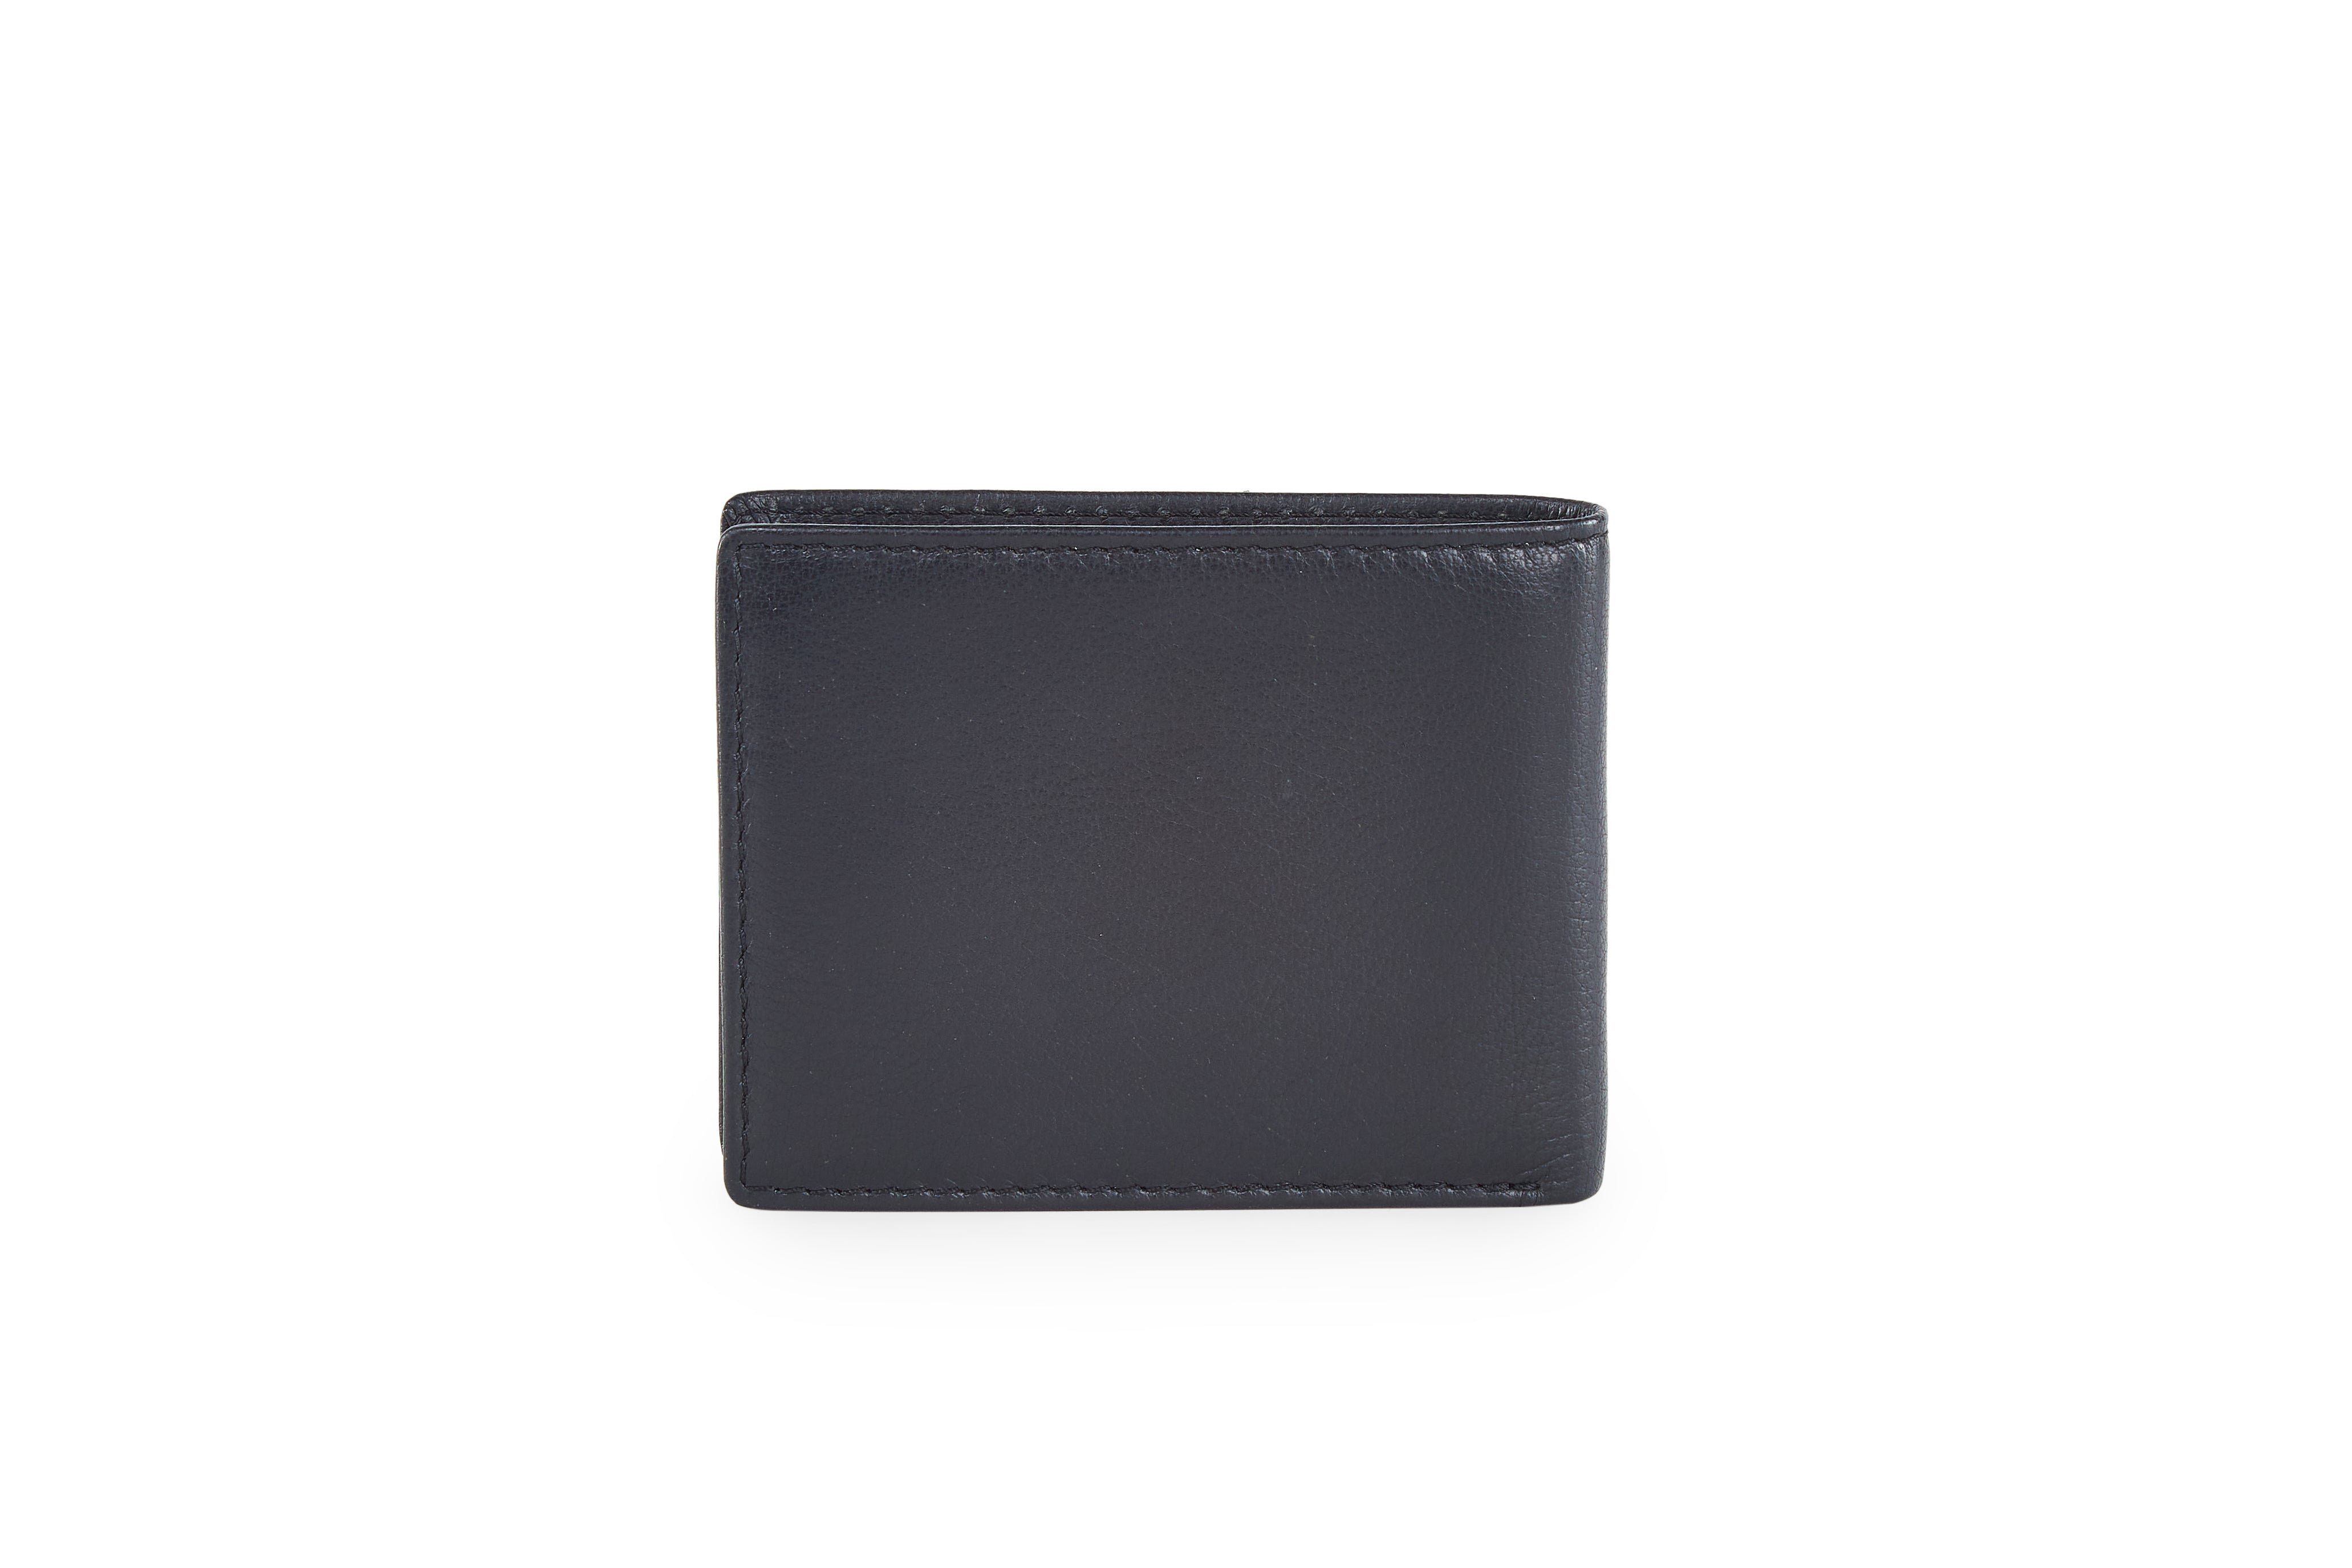 Buy Lodis Leather Passcase Wallet with Card Case | Lodis